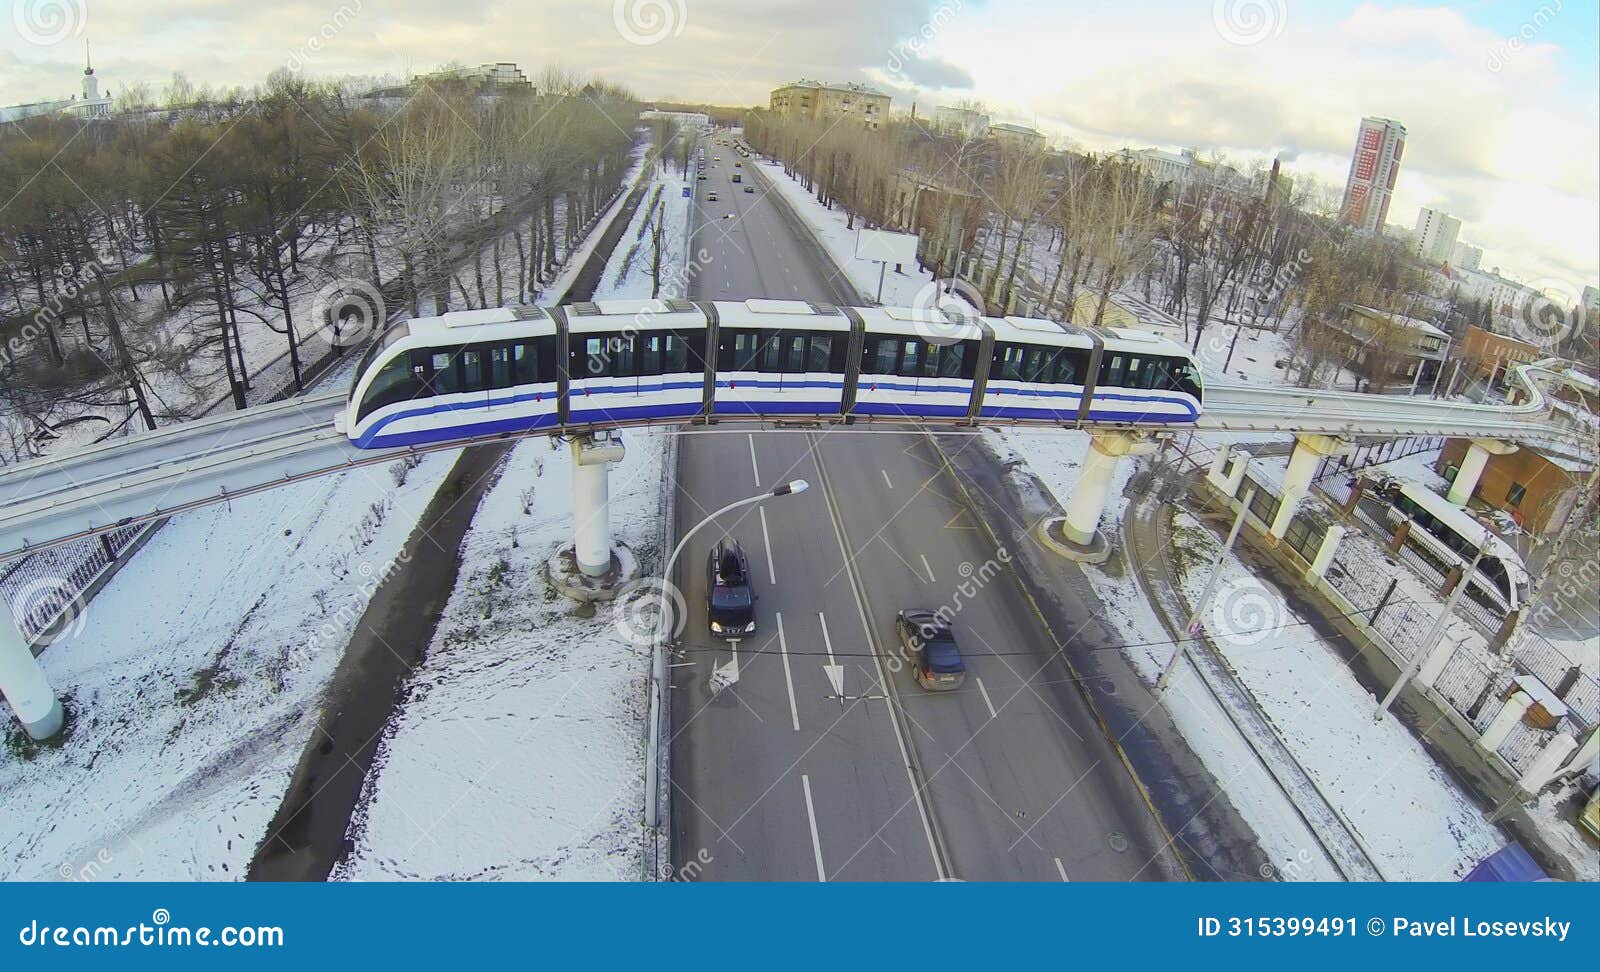 monorail train passes over a four-lane road in the